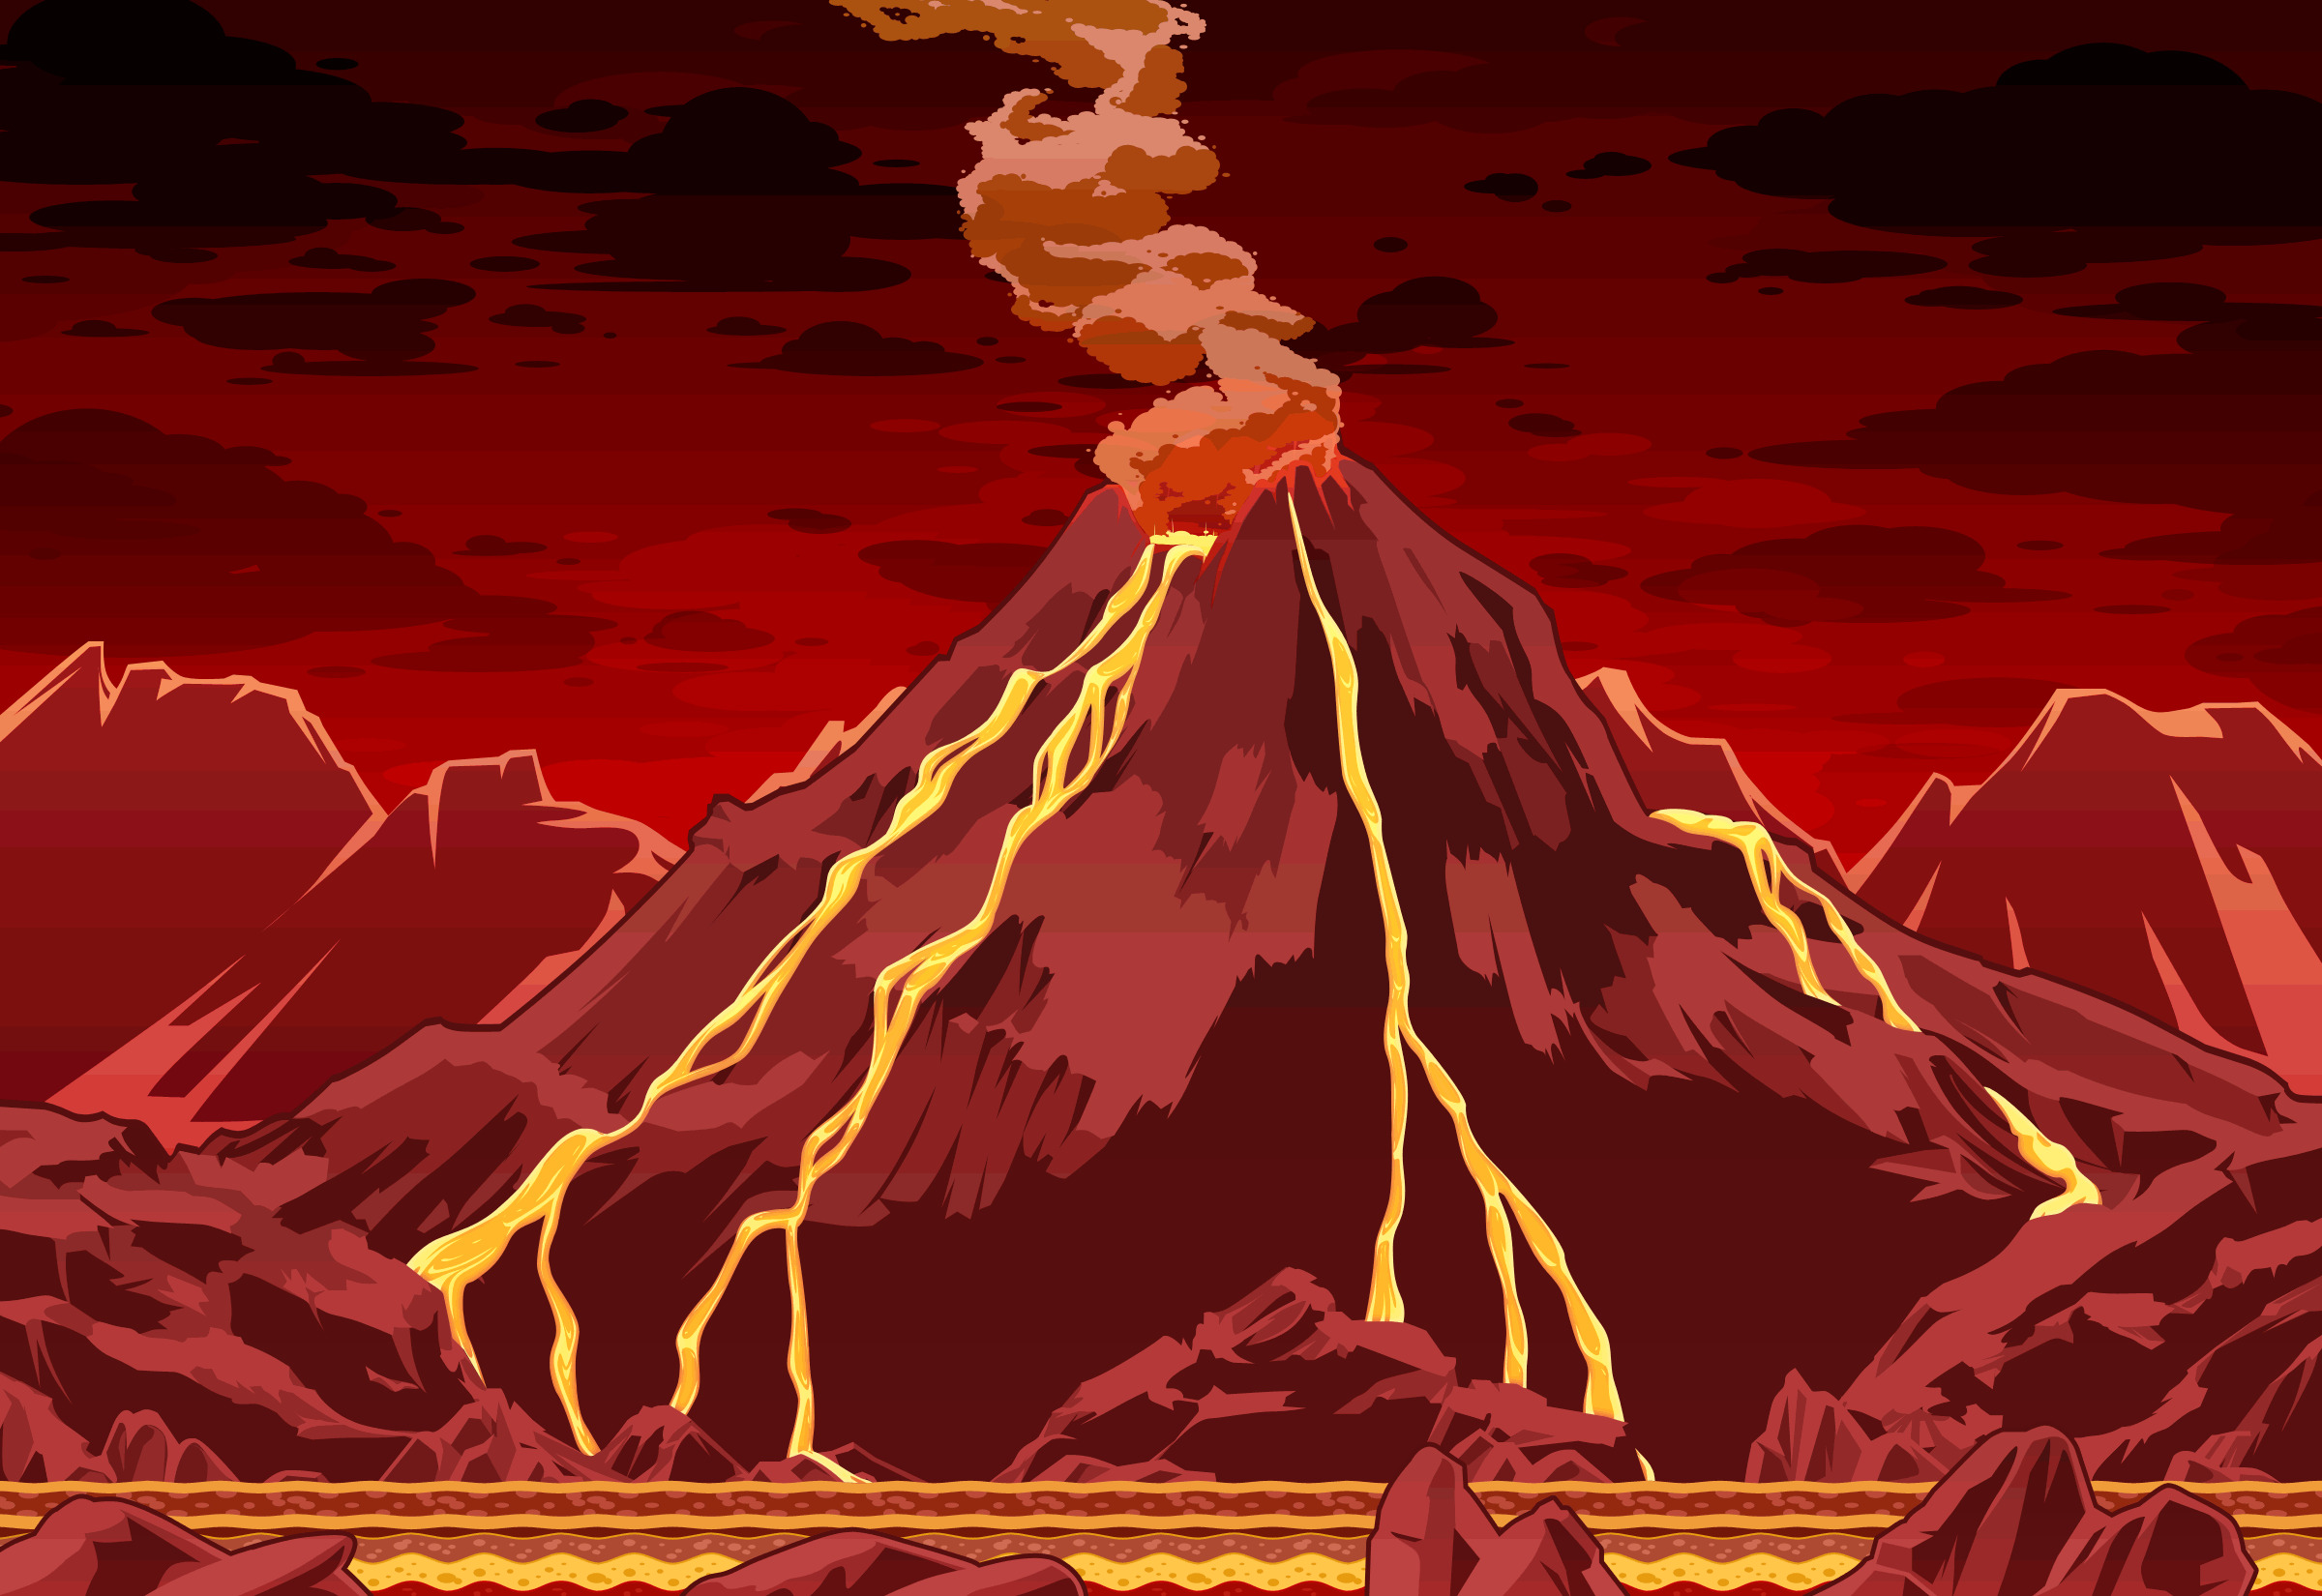 Animated Volcano Background (2) by agifarclor on DeviantArt